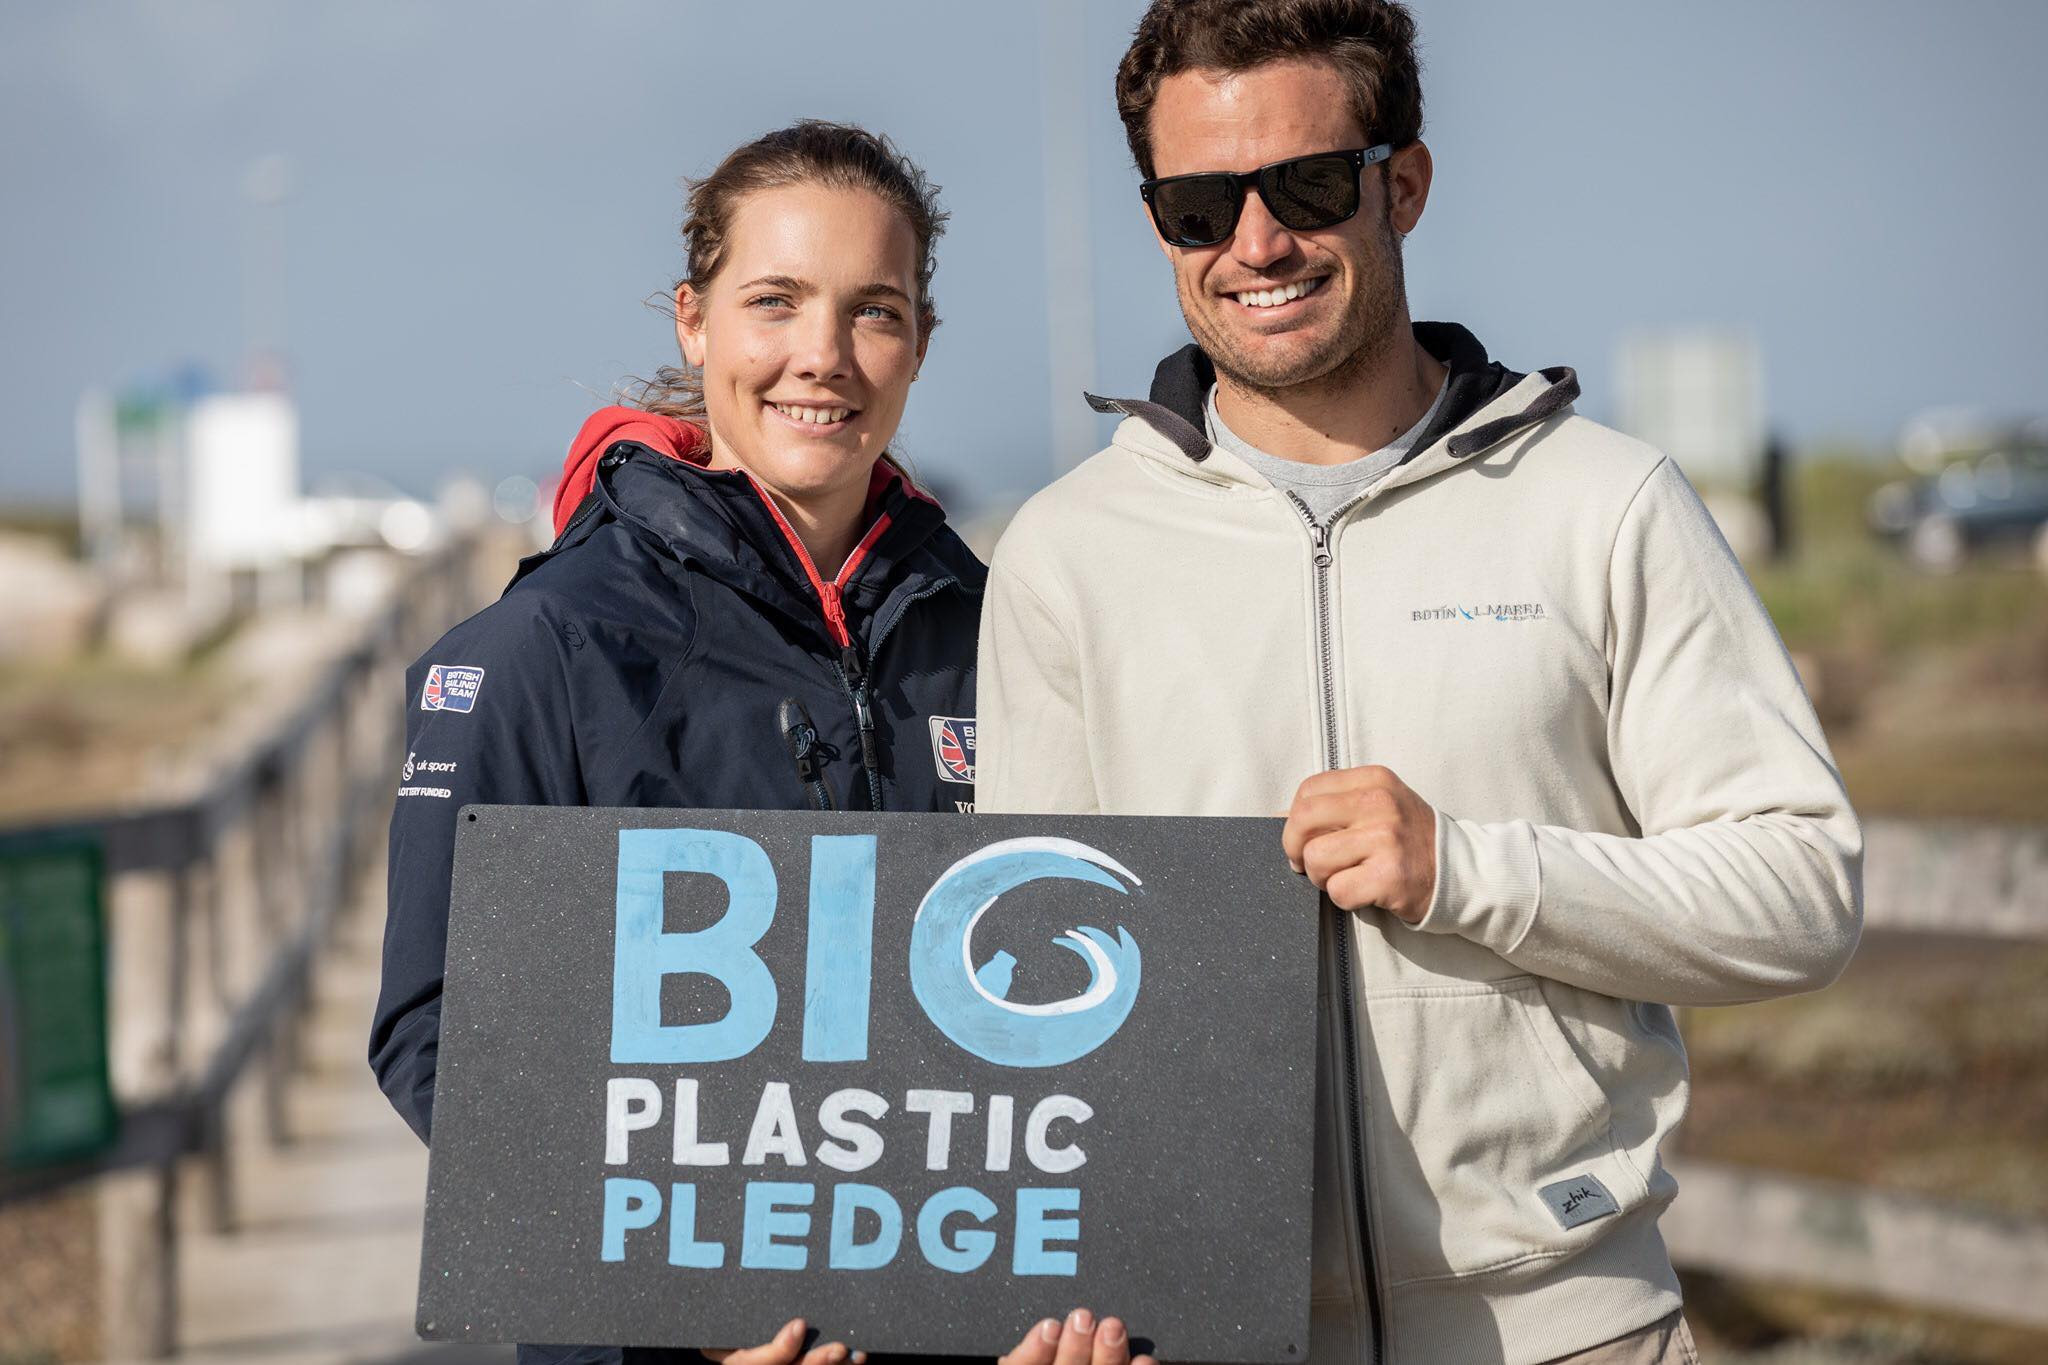 British Olympic sailor Hannah Mills launched the Big Plastic Pledge in 2019, an athlete-driven movement to eliminate the use of single-use plastic within and beyond sport ©BIg Plastic Pledge